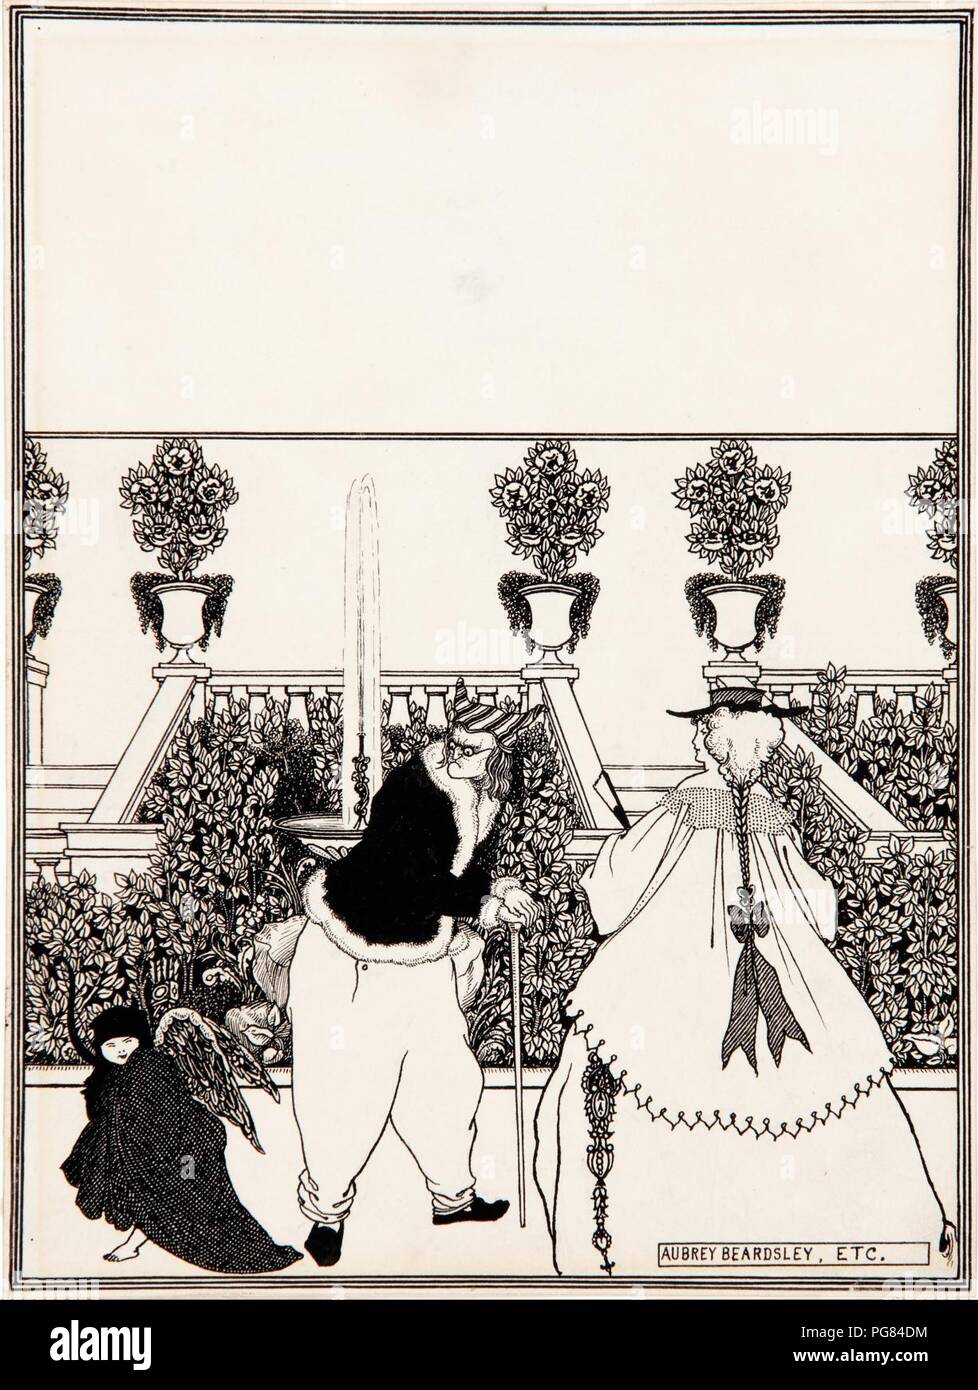 Aubrey Beardsley - The driving of Cupid from the garden - preparatory drawing for the cover design of 'The Savoy', no.3... - Stock Photo